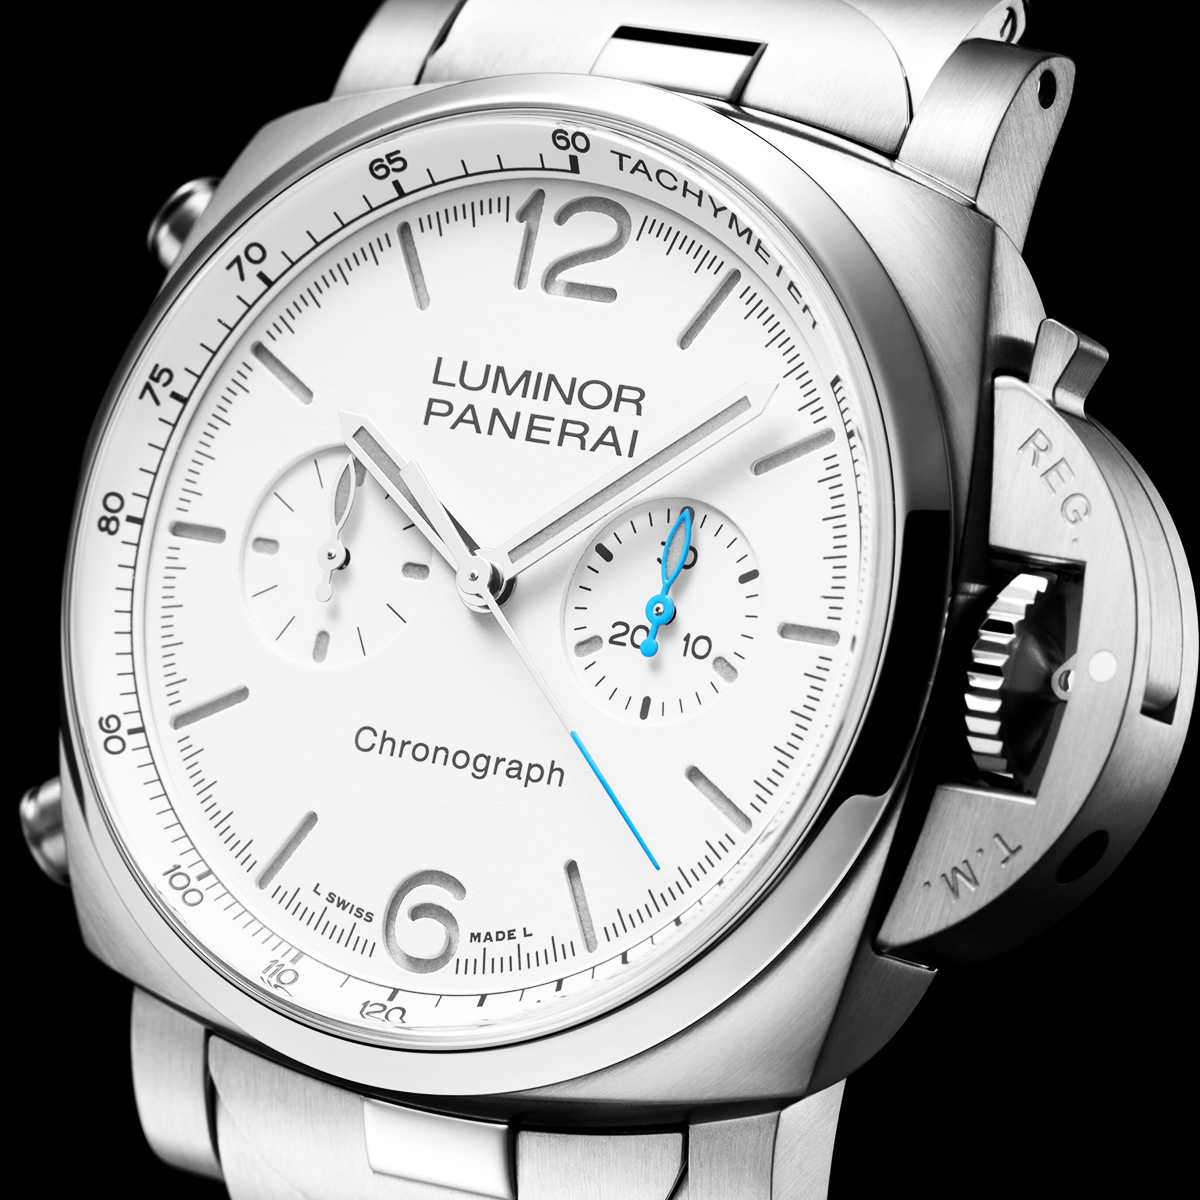 Luminor 44mm White Dial Automatic Chronograph Bracelet Watch